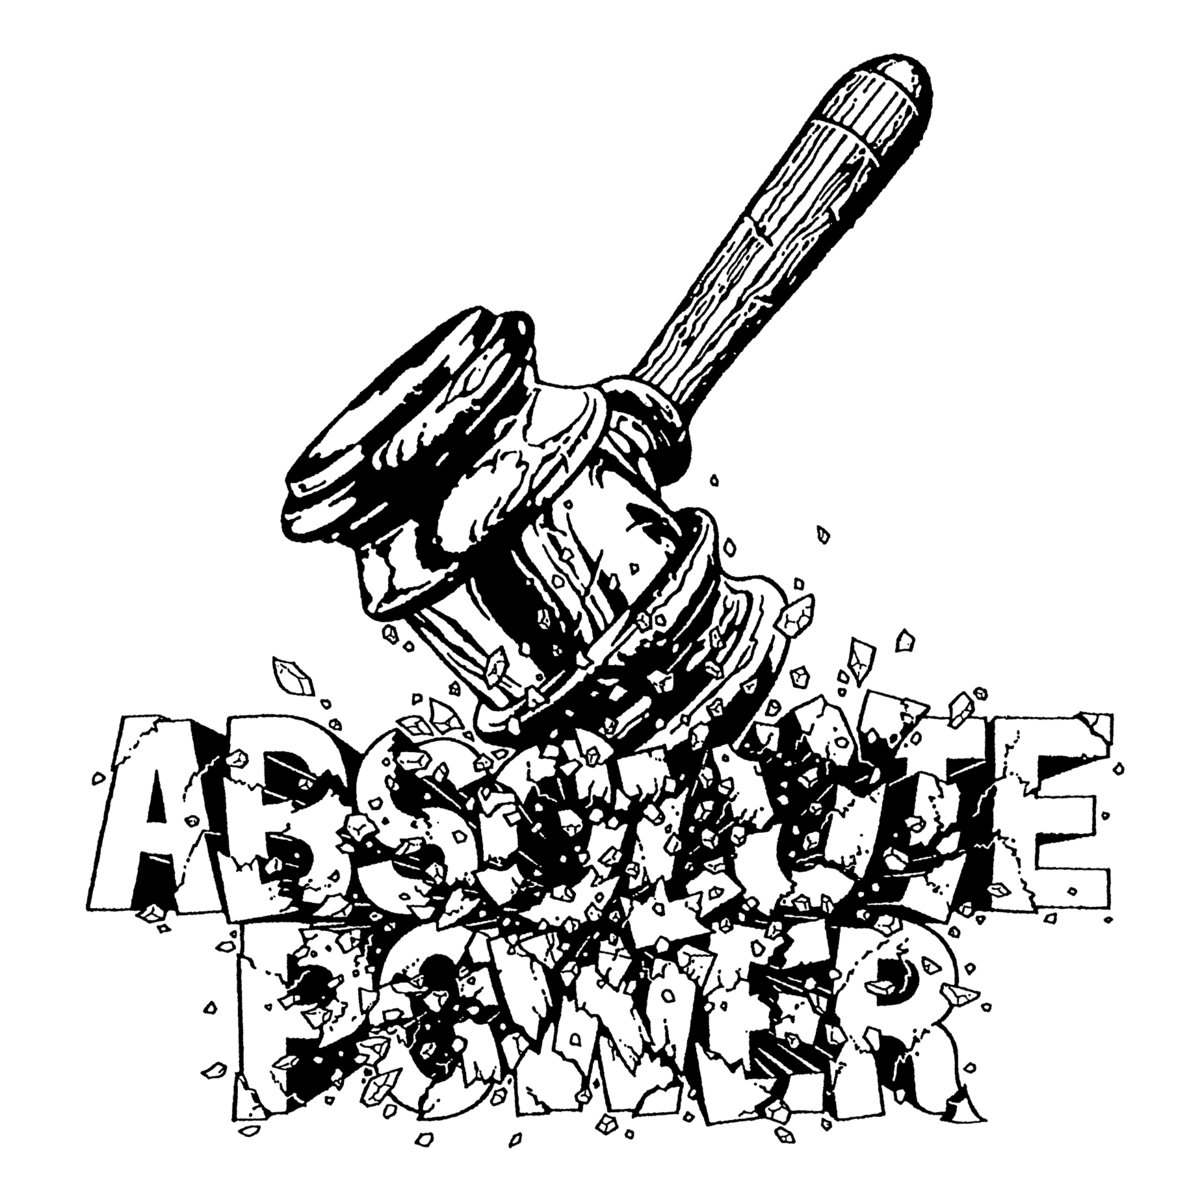 Absolute Power #1